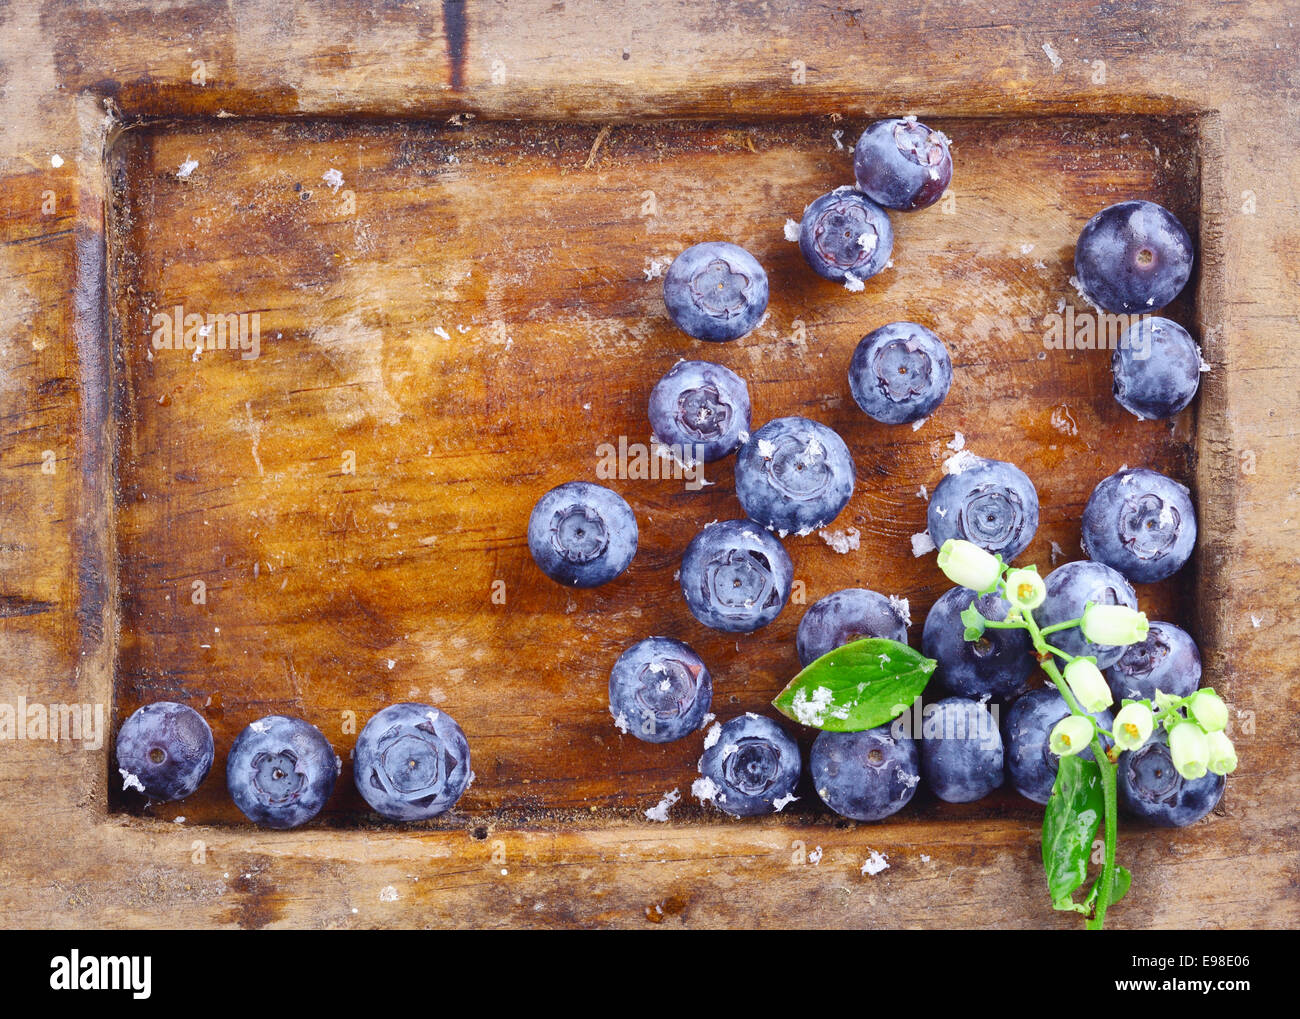 Close-up of a small amount of ripe blueberries or bilberries in an old wooden tray with a small flowery branch Stock Photo